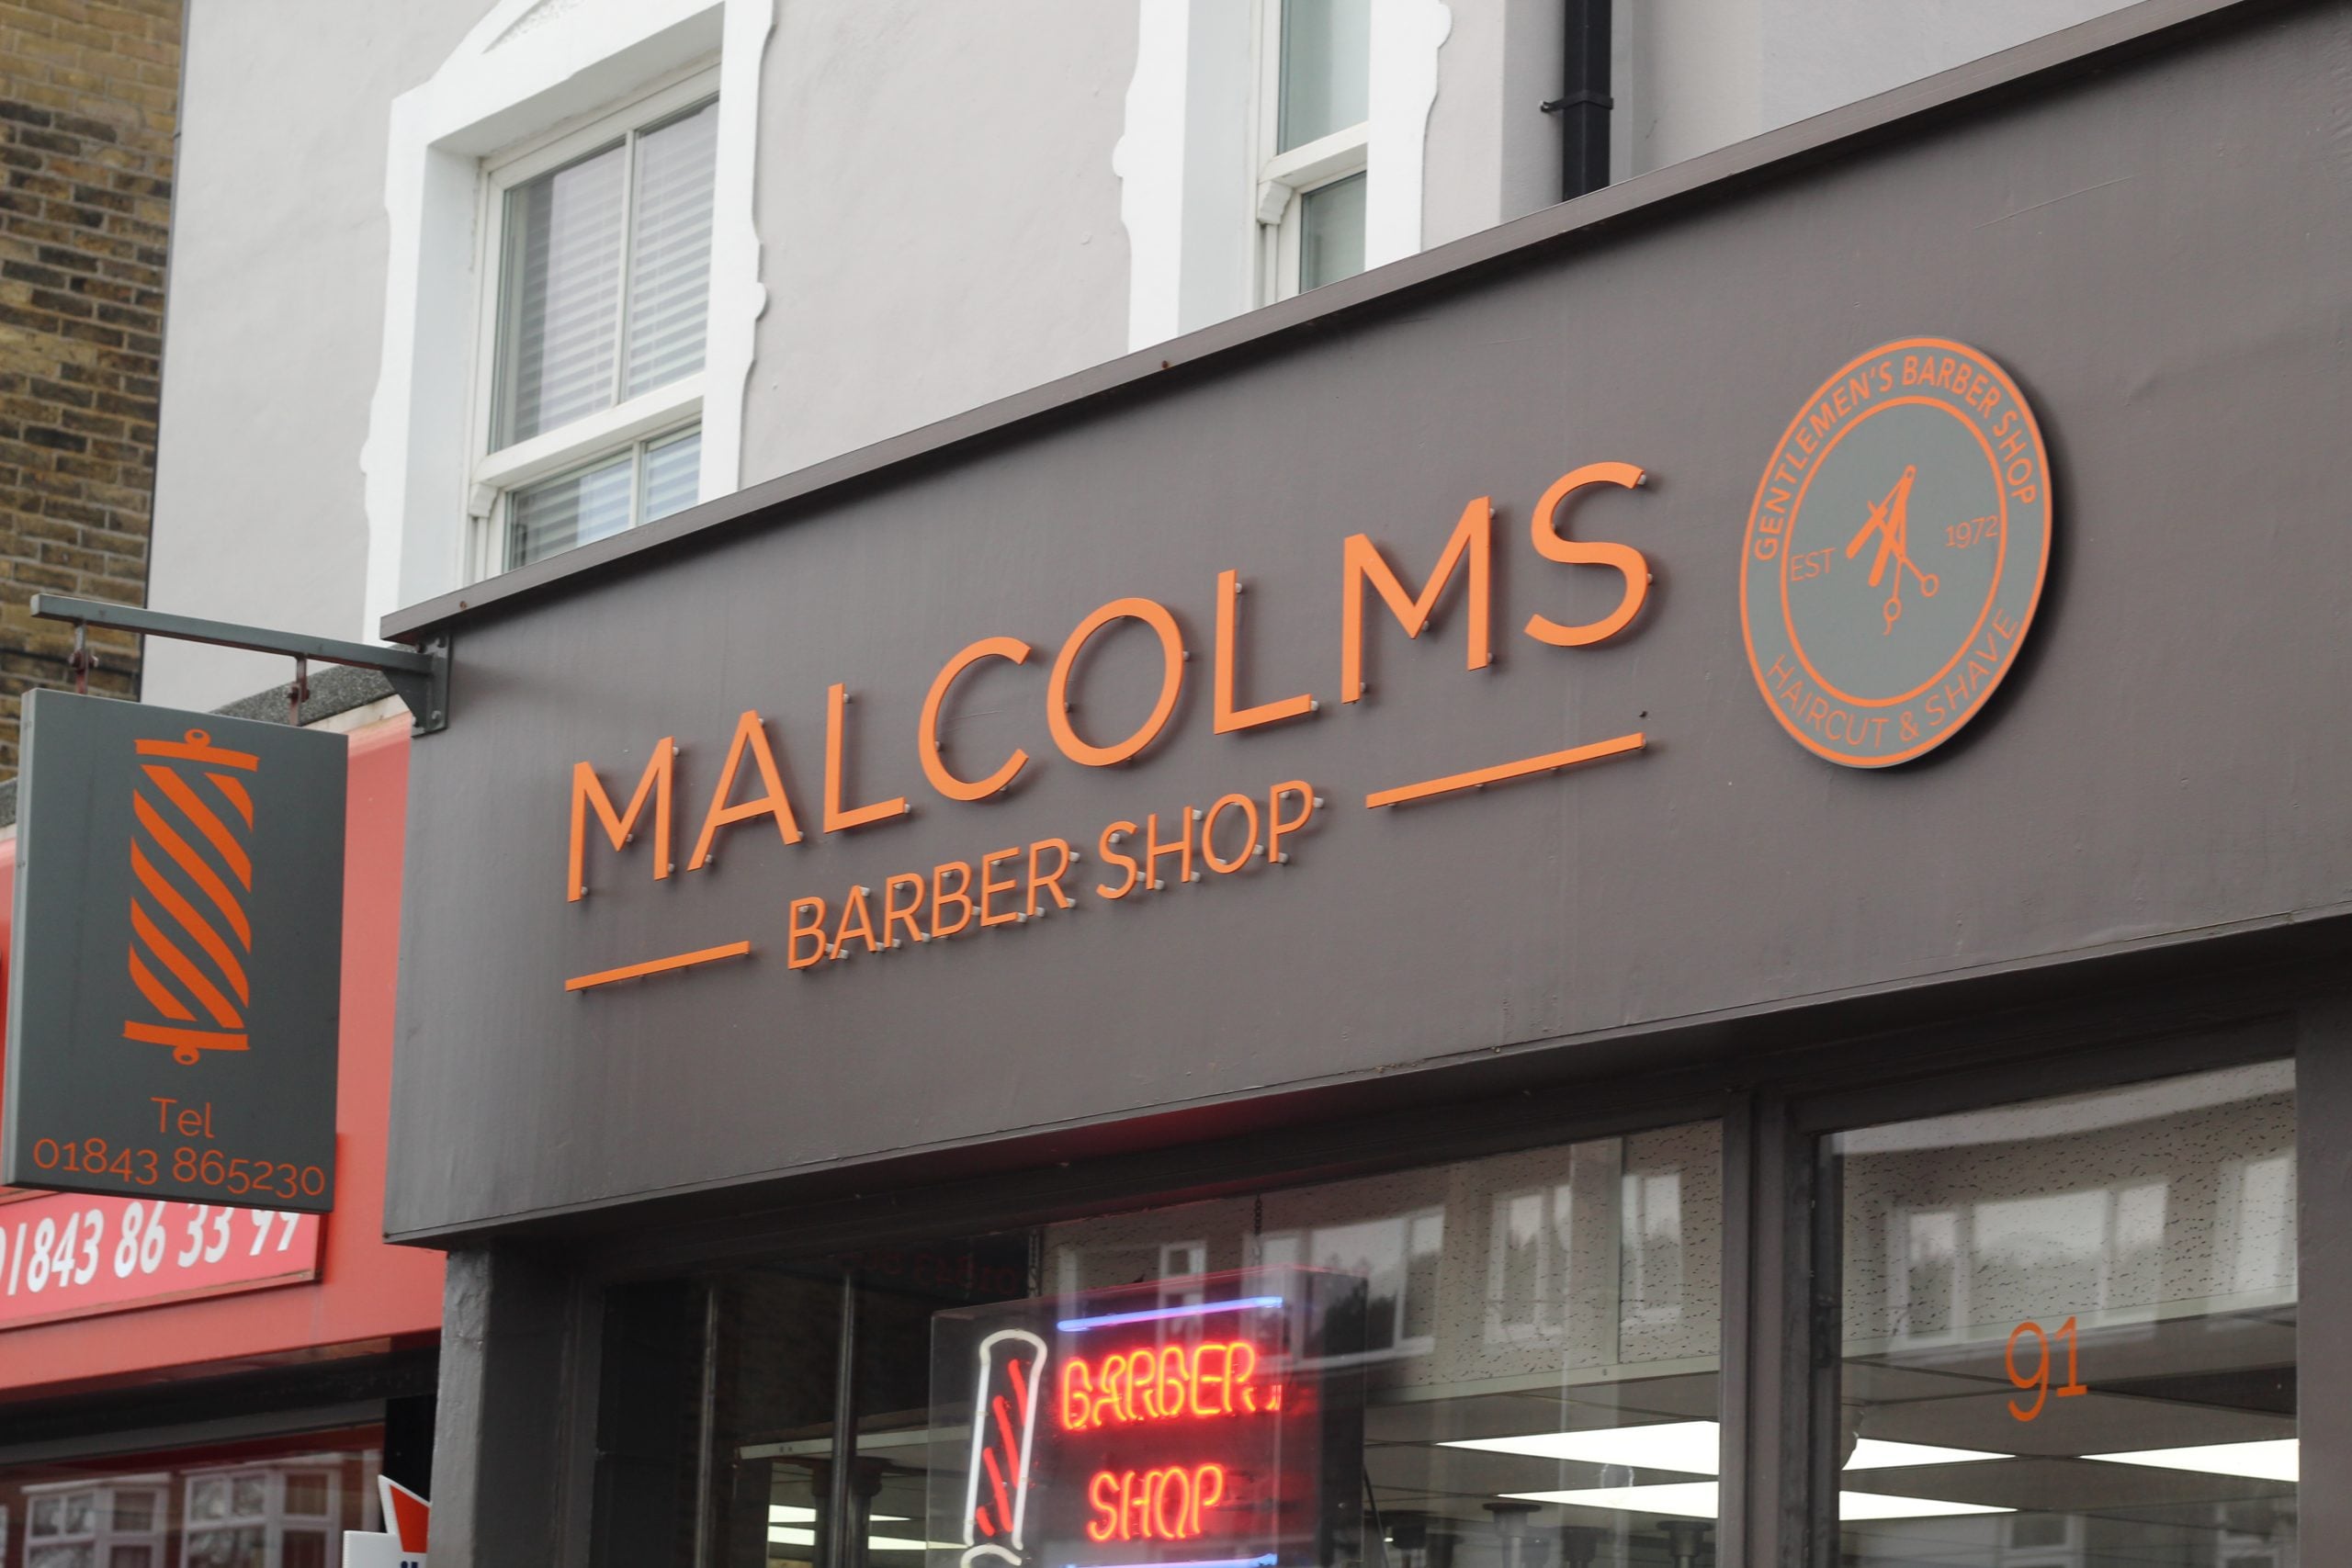 Malcolms Barber Shop  Broadstairs Premium Barbers for over 40 years